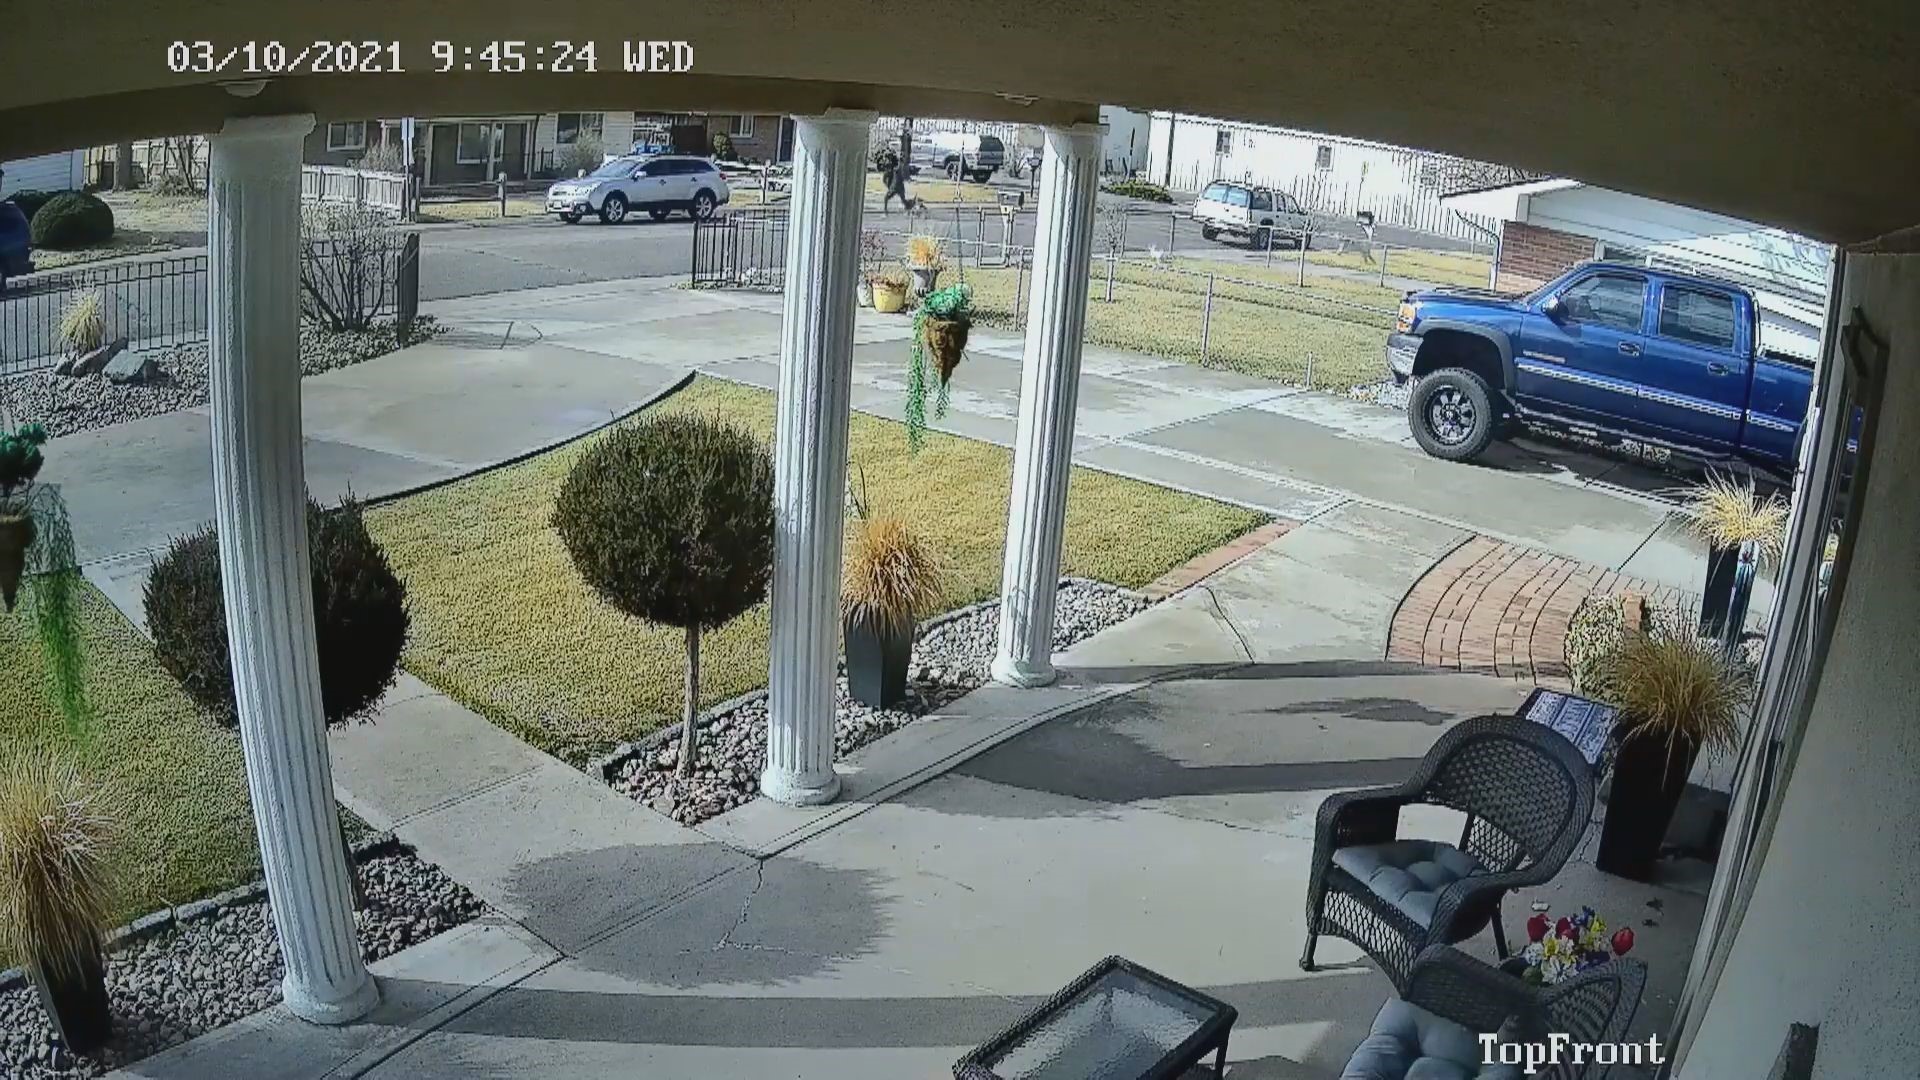 Doorbell camera video shows a man being attacked by three dogs in a Commerce City neighborhood shortly after the man exited his vehicle.